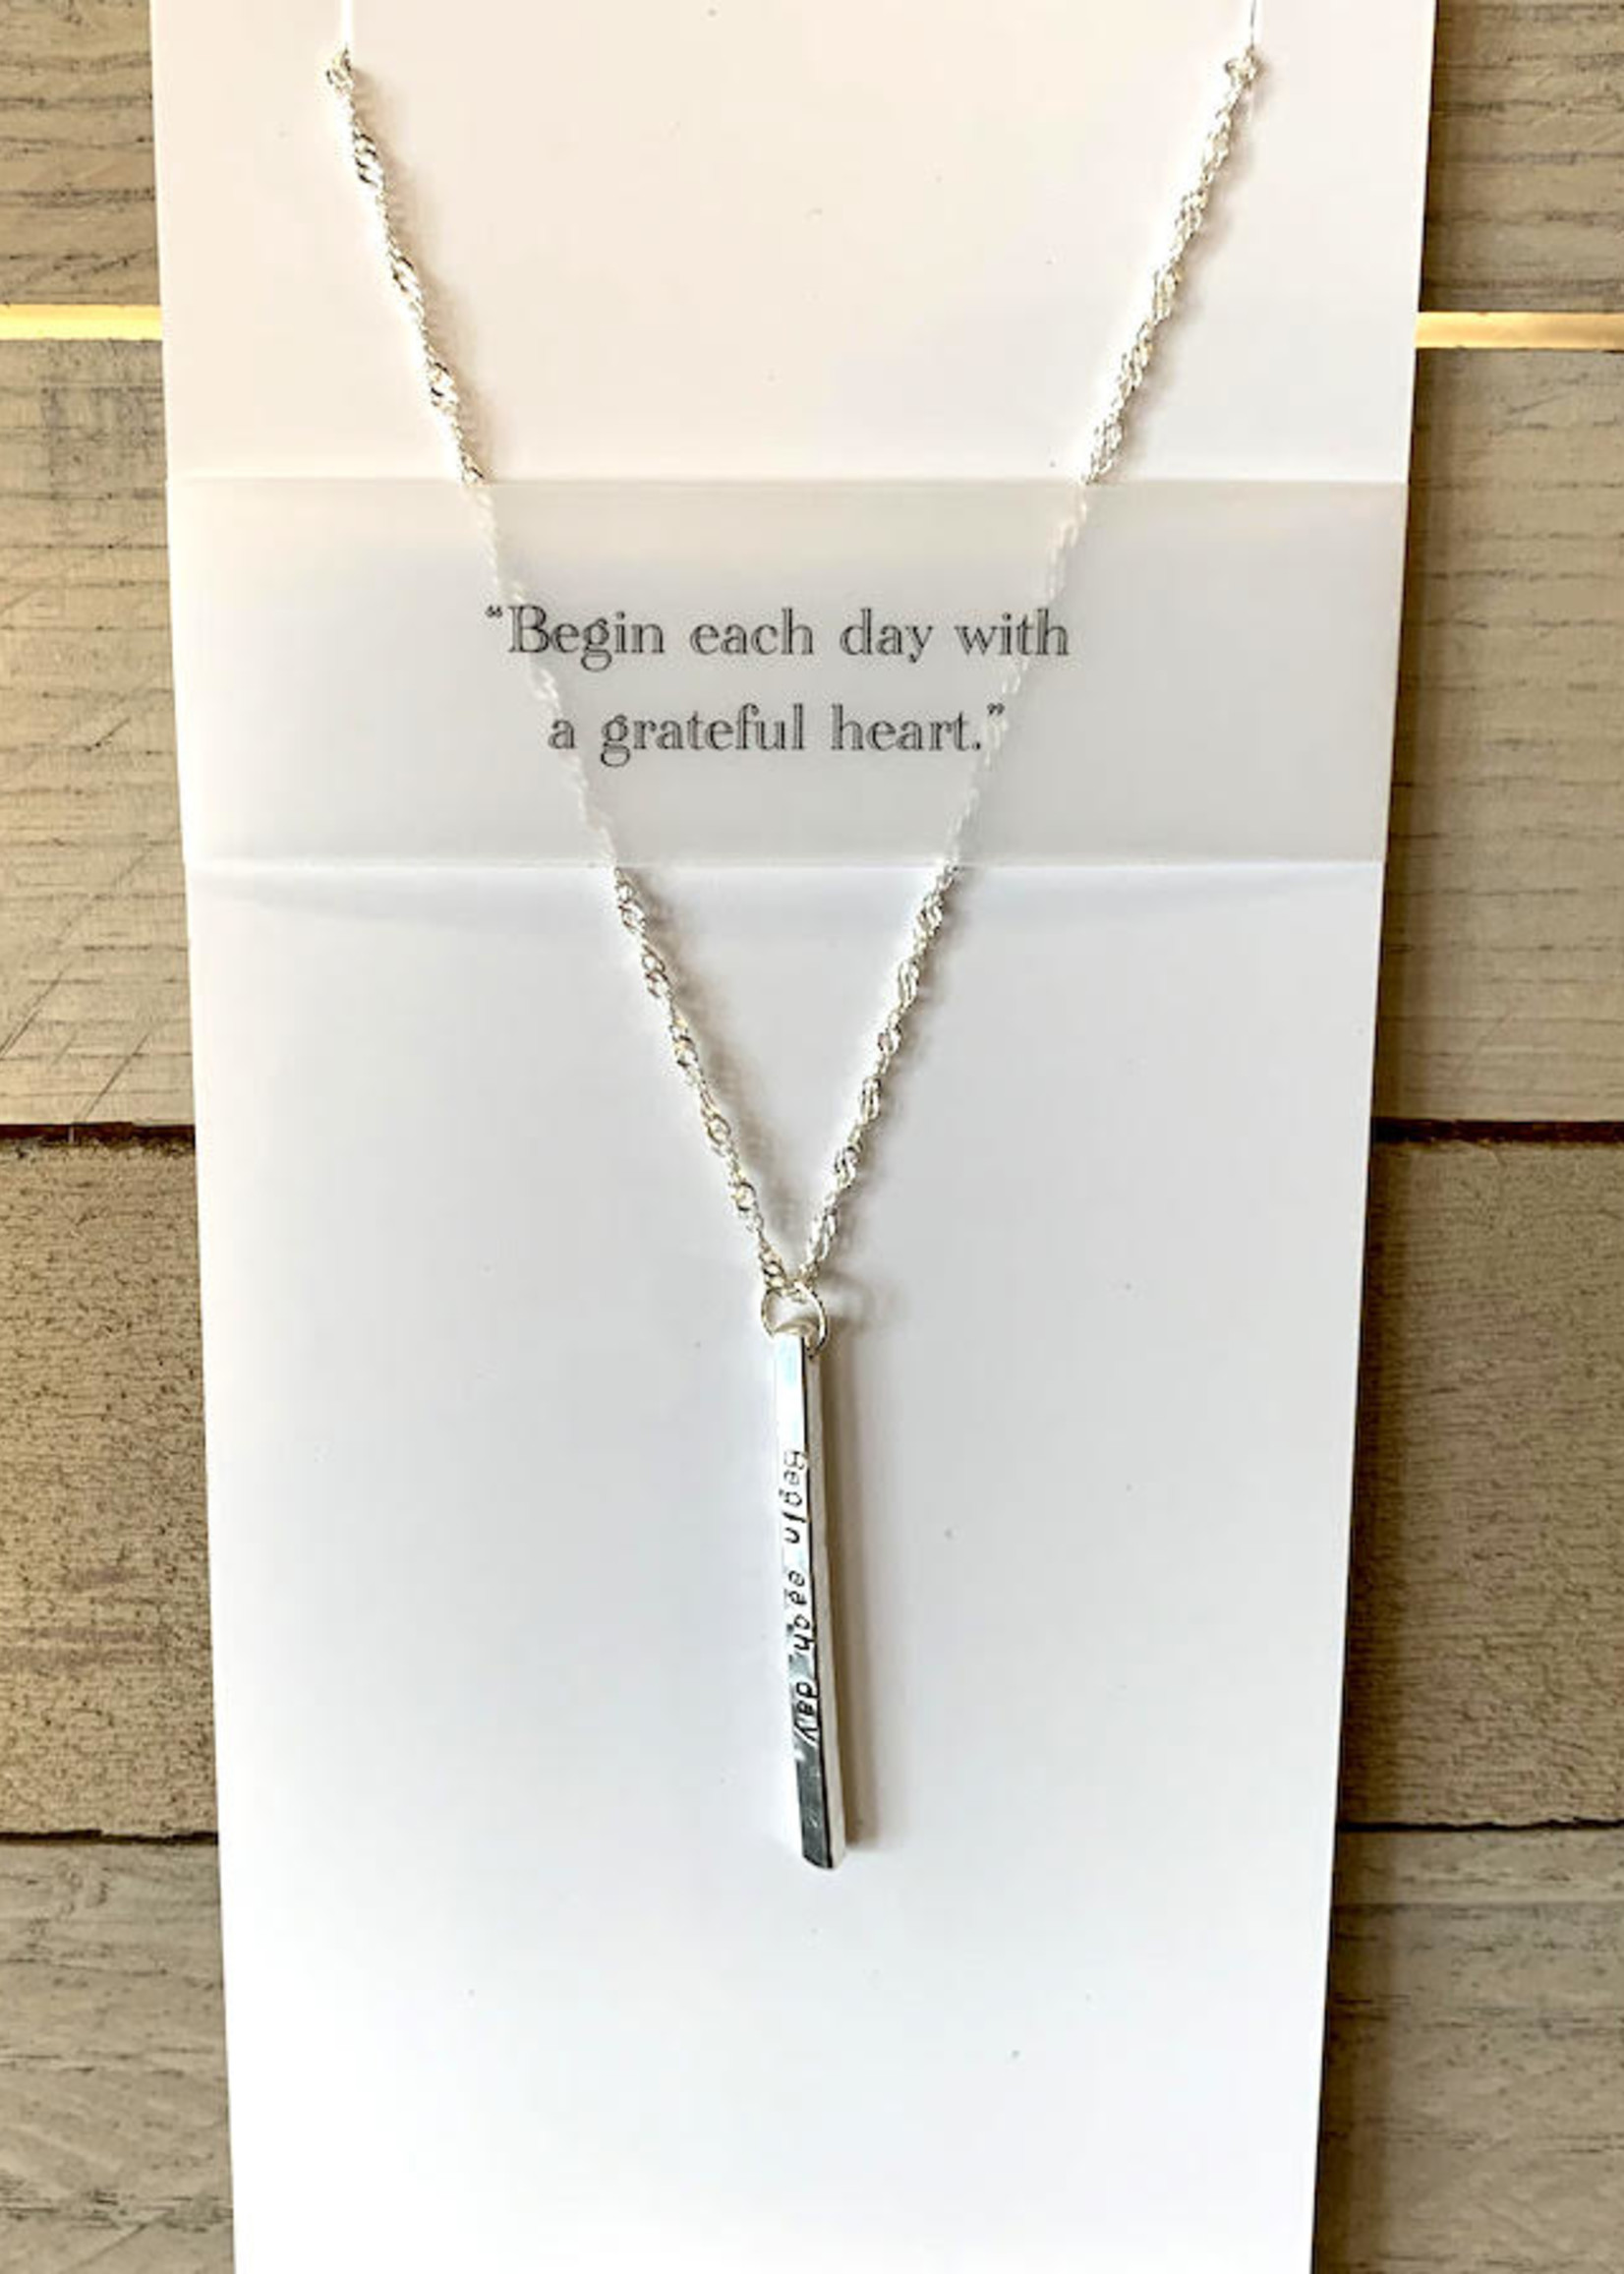 Quote Necklace: "Grateful heart"